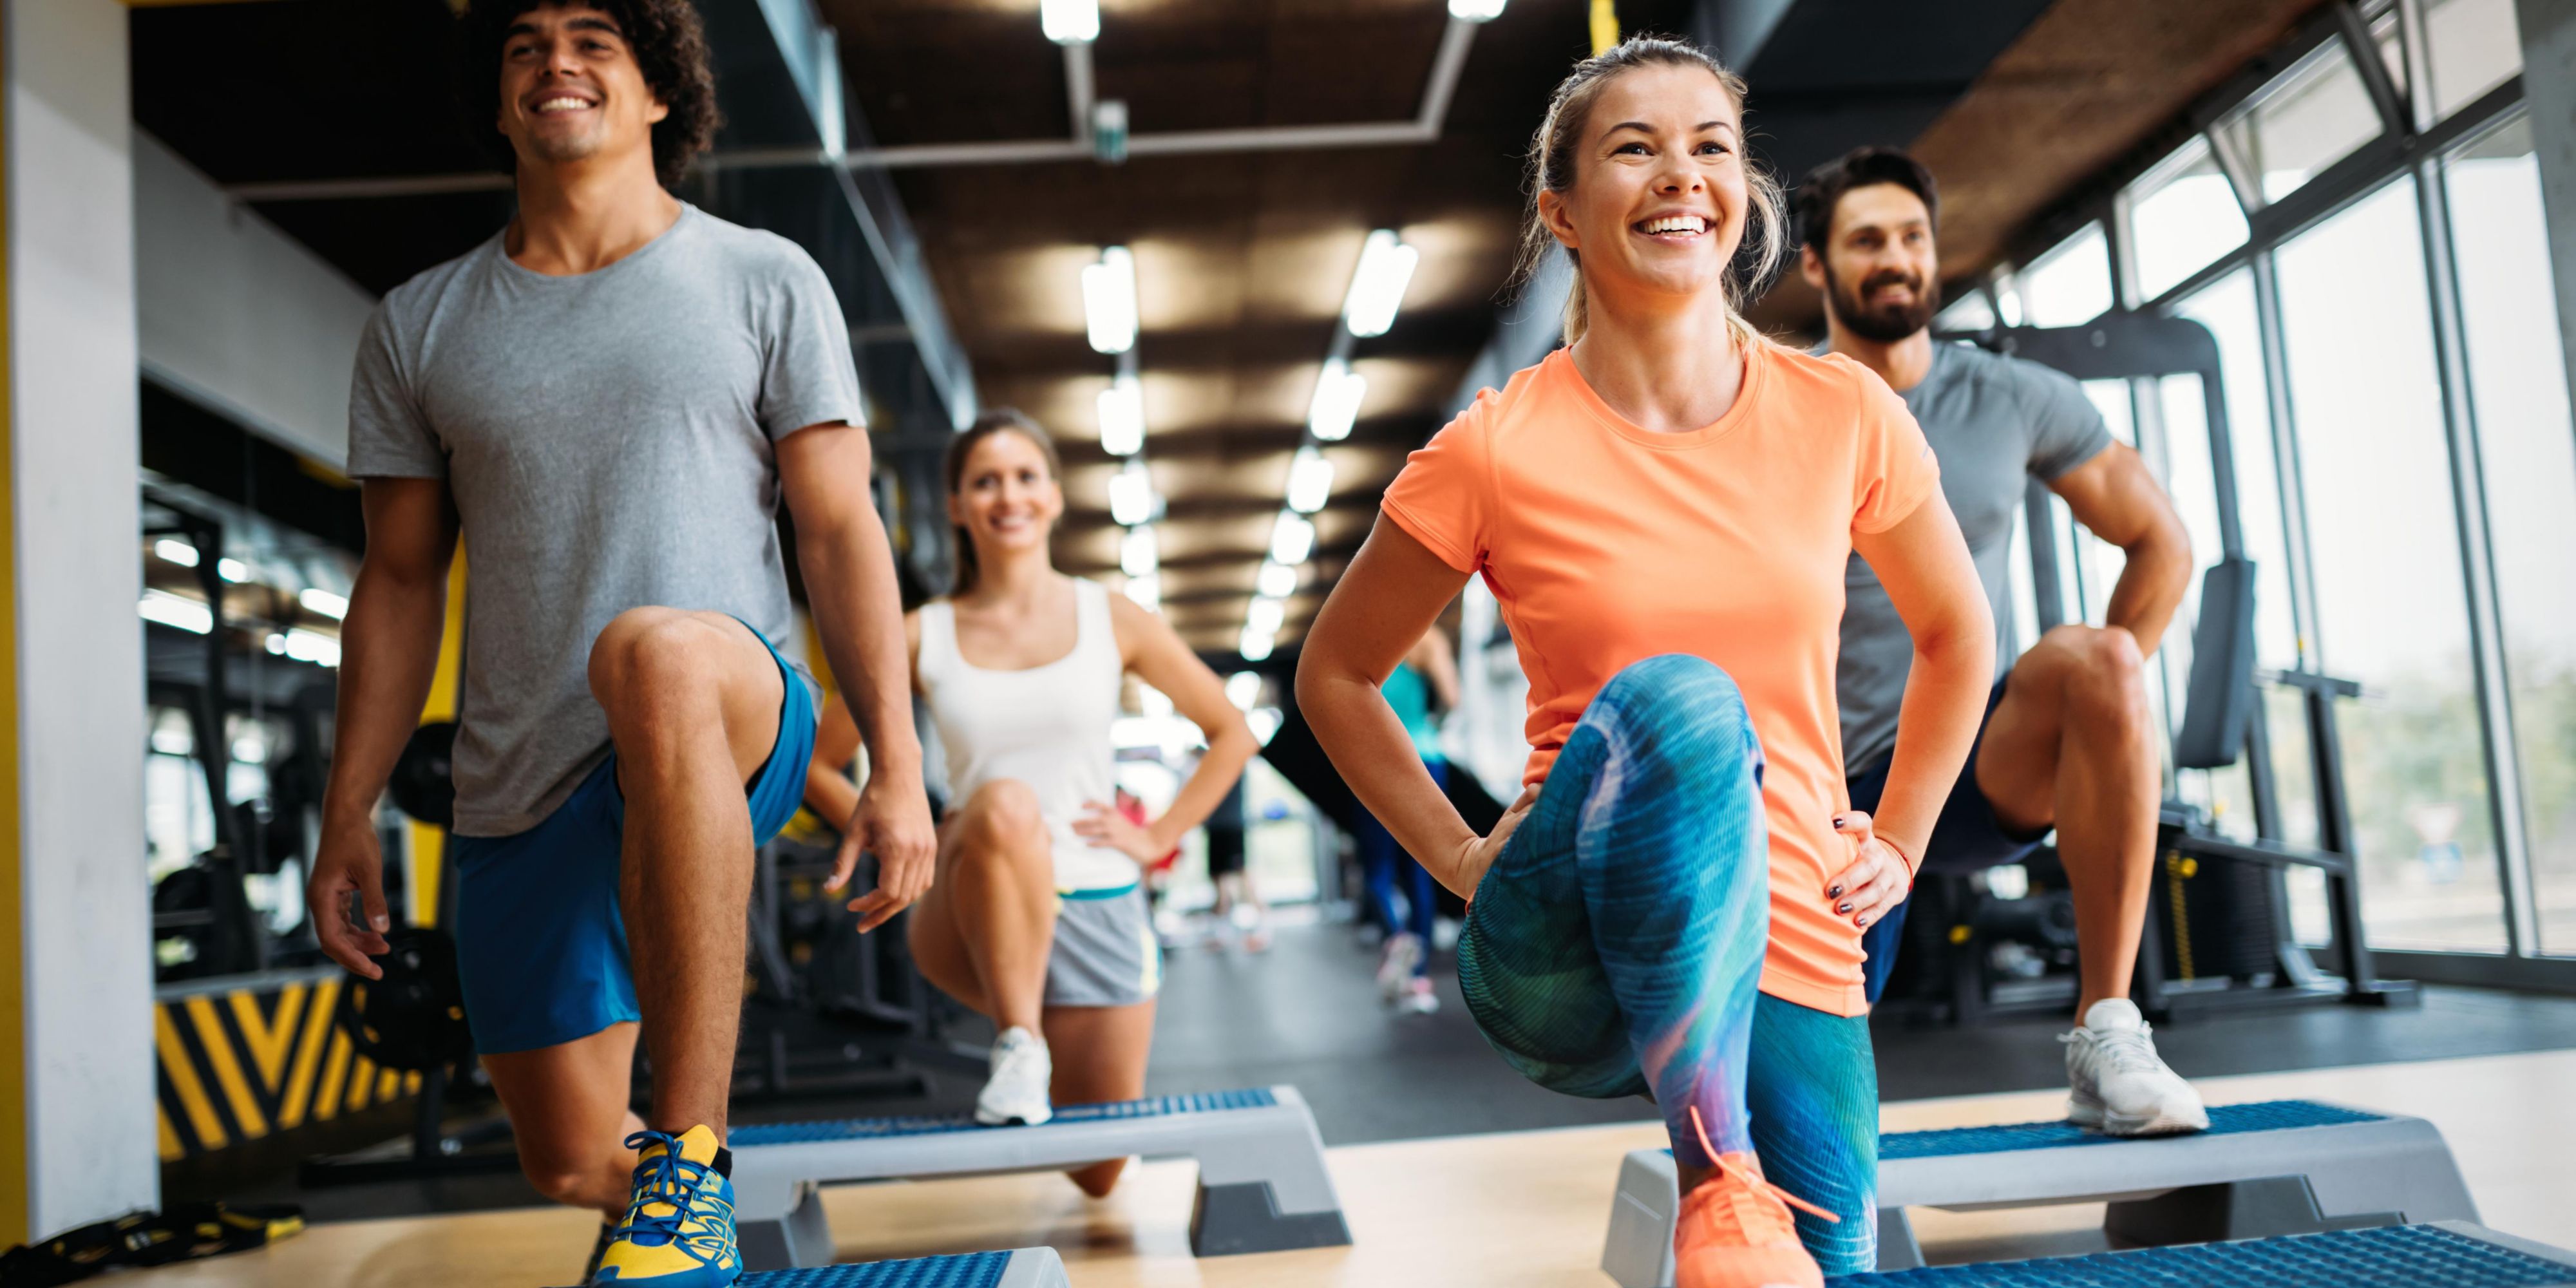 Committed to being fit? Enjoy discounted entry at the local Nuffield Gym.  It's only a 4-minute walk or 2-minute sprint away from our hotel. Show your key card wallet at the gym reception to qualify for the discount.